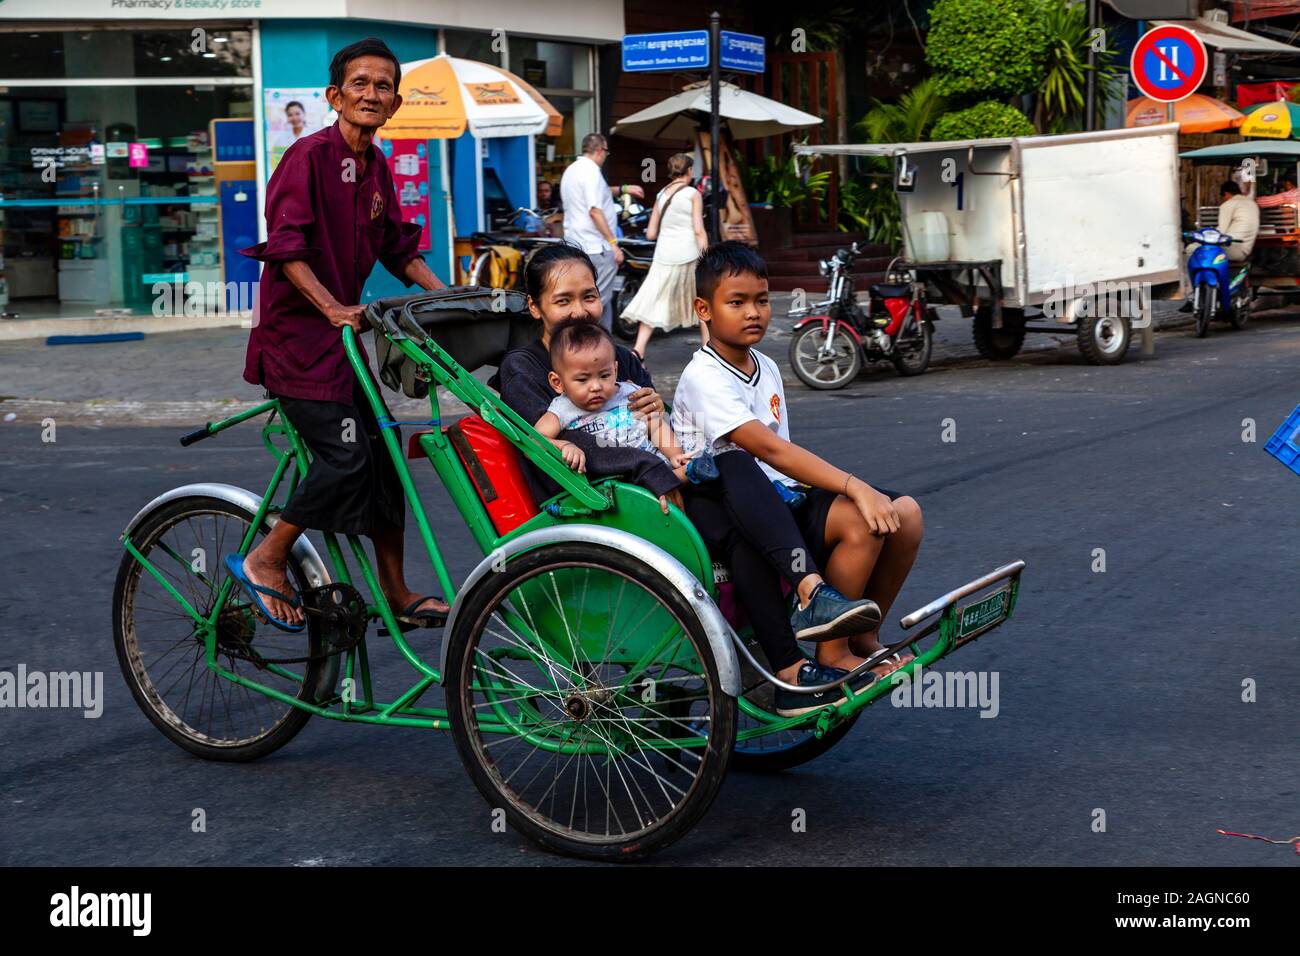 A Cambodian Family Travelling By Pedicab, Phnom Penh, Cambodia. Stock Photo